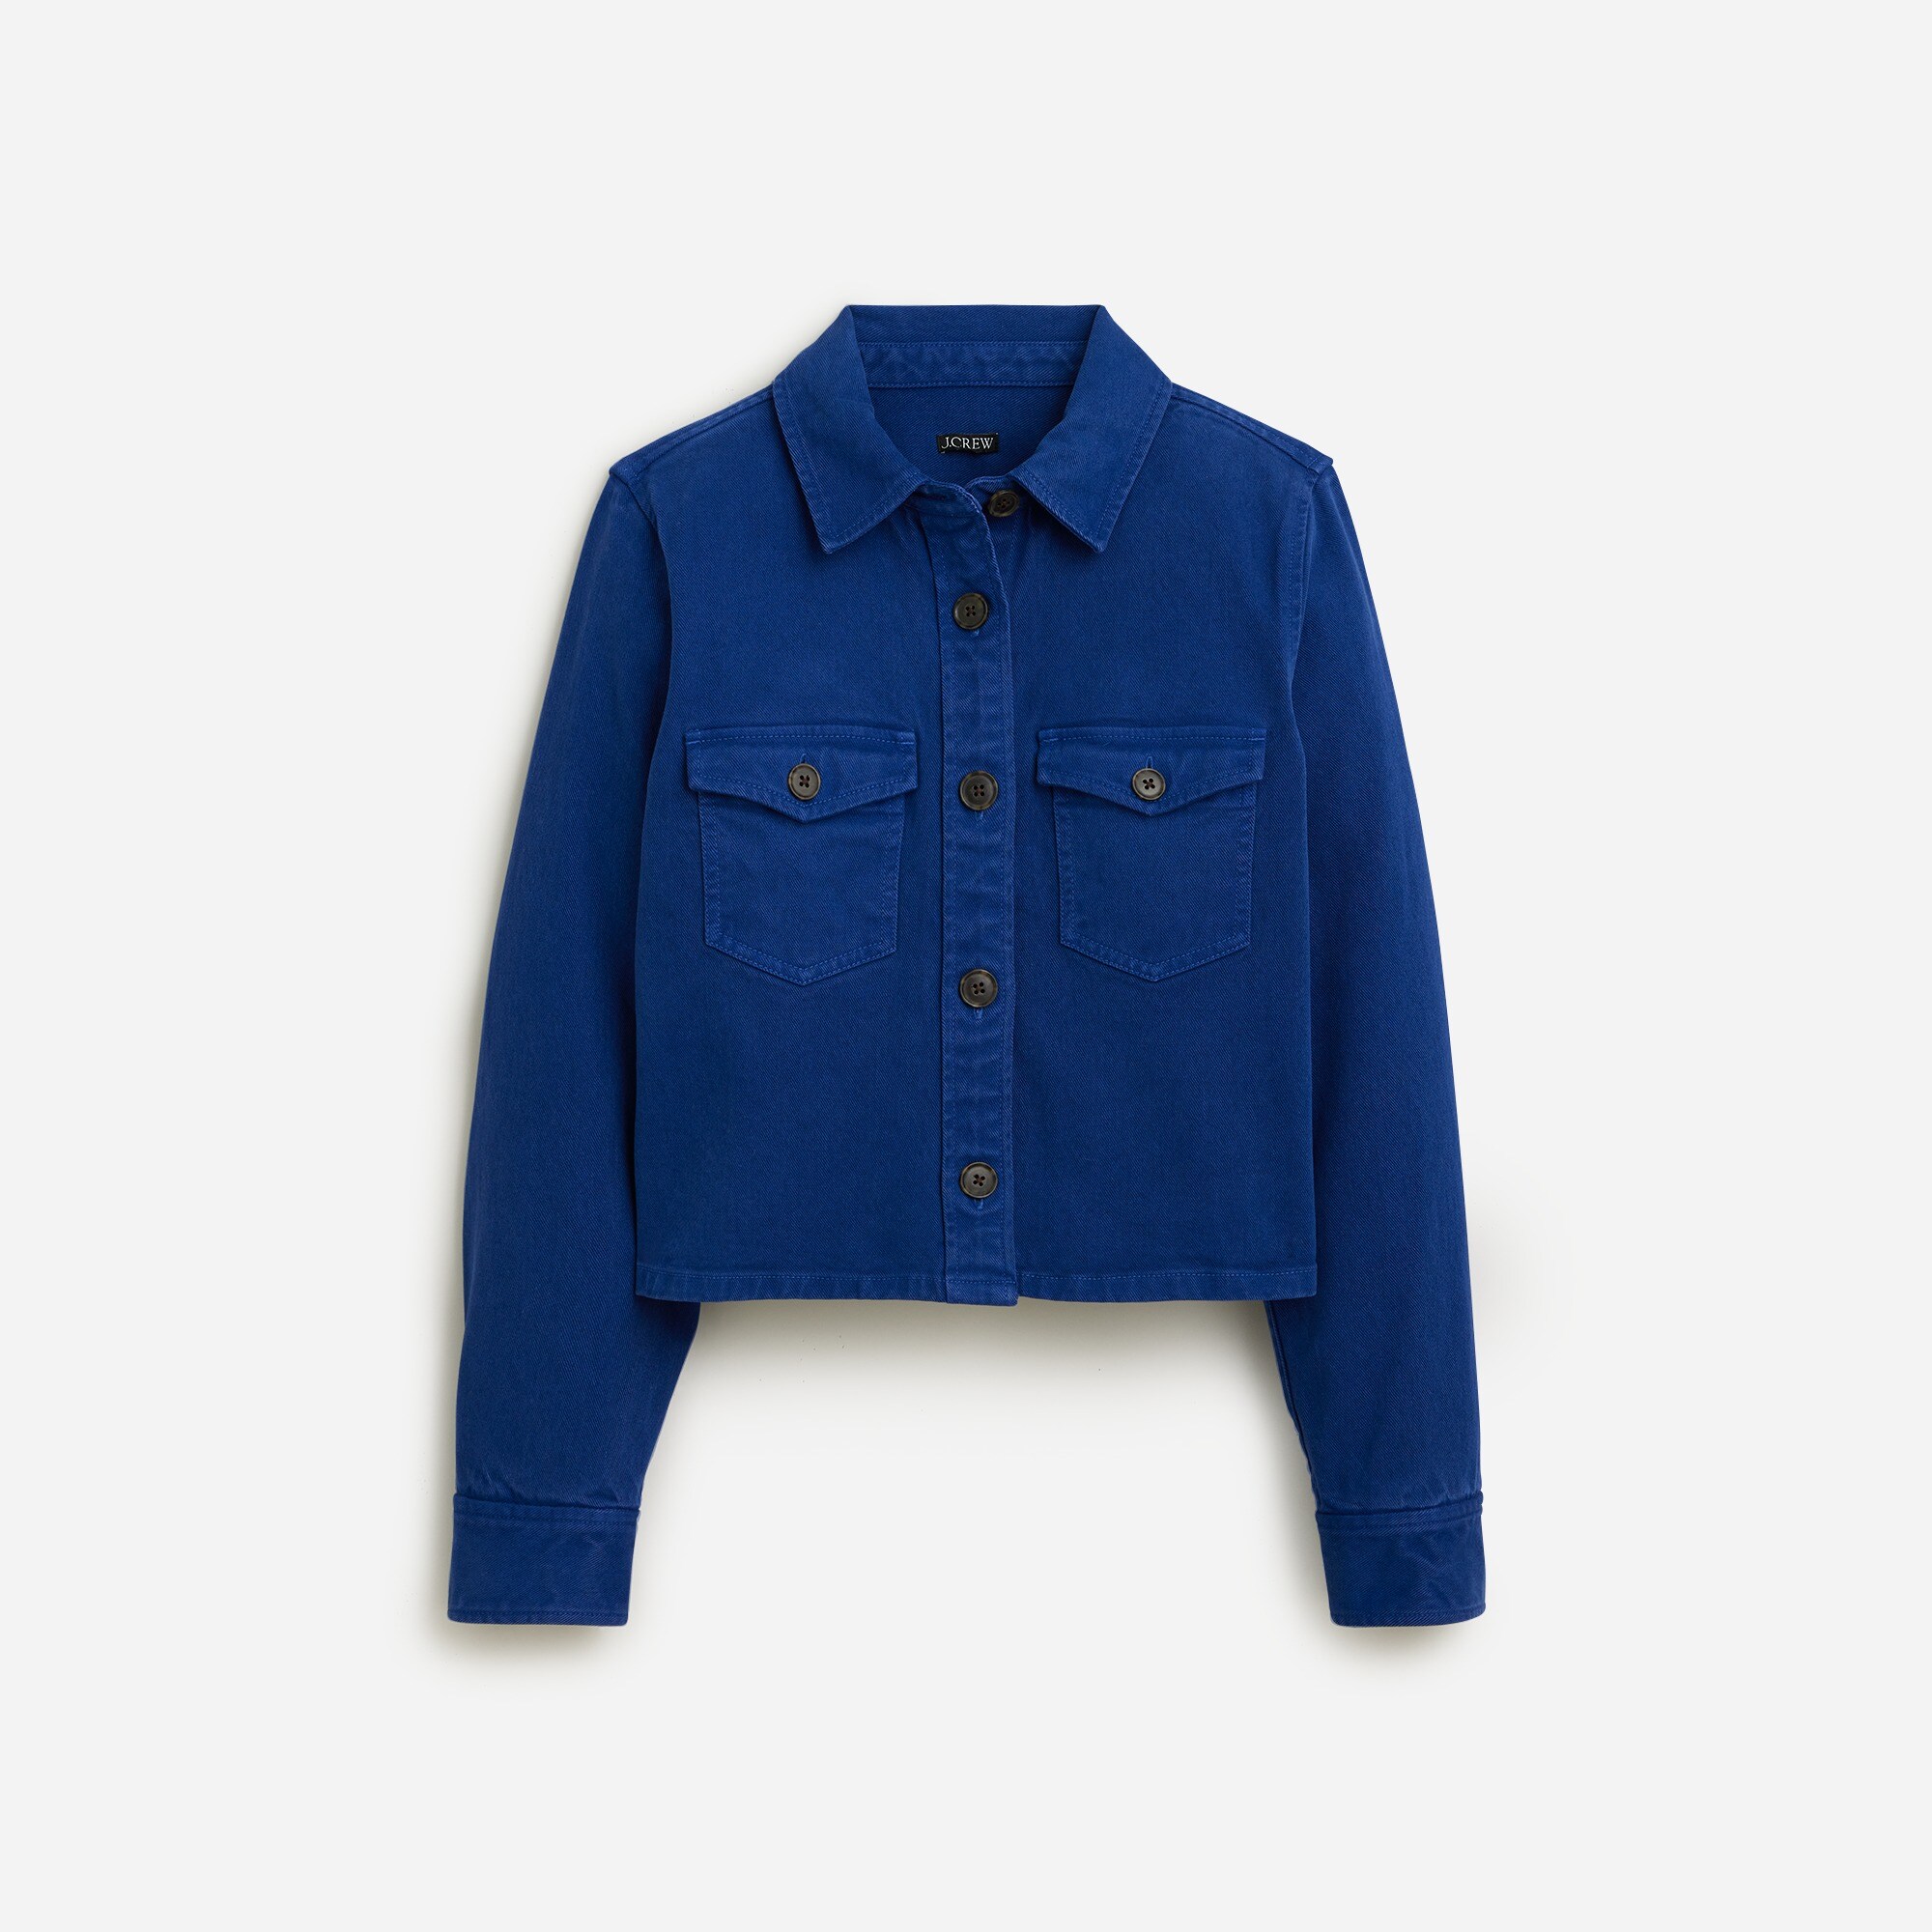  Cargo cropped shirt-jacket in chino